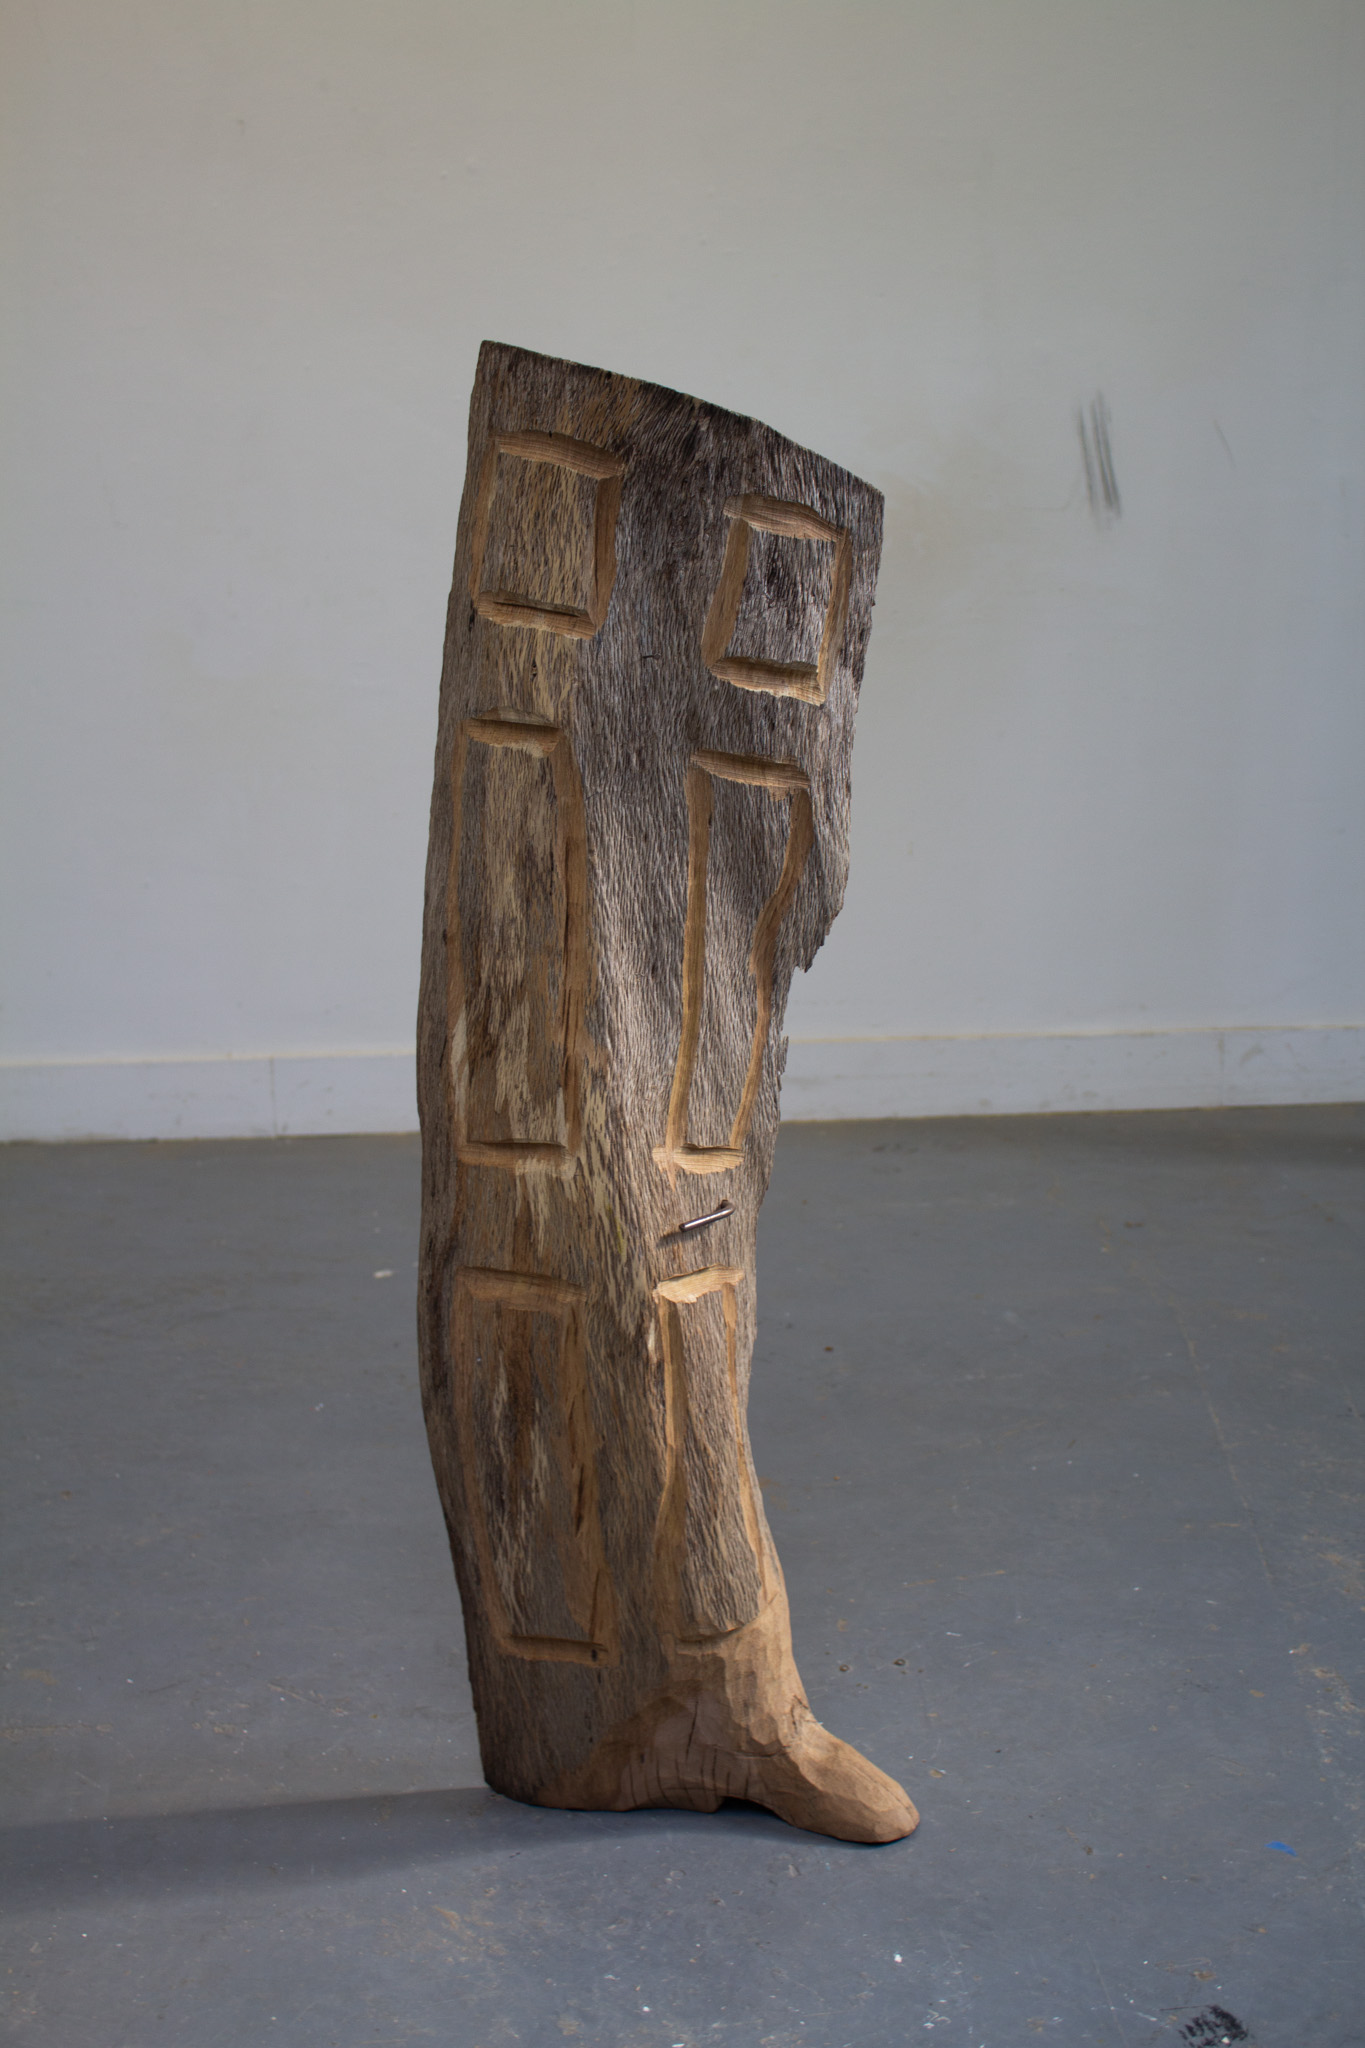 A photograph of a carved and sanded weathered grey cypress-wood sculpture made by Ryan Christopher Clarke. The Cypress lumber has been shapened into a thin, tilting, squeezed door with scrap metal used as a handle. Cypress wood is said to be “extremely durable, light, soft, straight grained with a soft amber or reddish hue and easily workable,...insect resistant, and very stable in contact with soil or water, tending to resist all forms of rot…can naturally age to a weathered gray” 2001 pamphlet by McReynolds Architects, The Menil Collection – Exterior Wall Renovations.